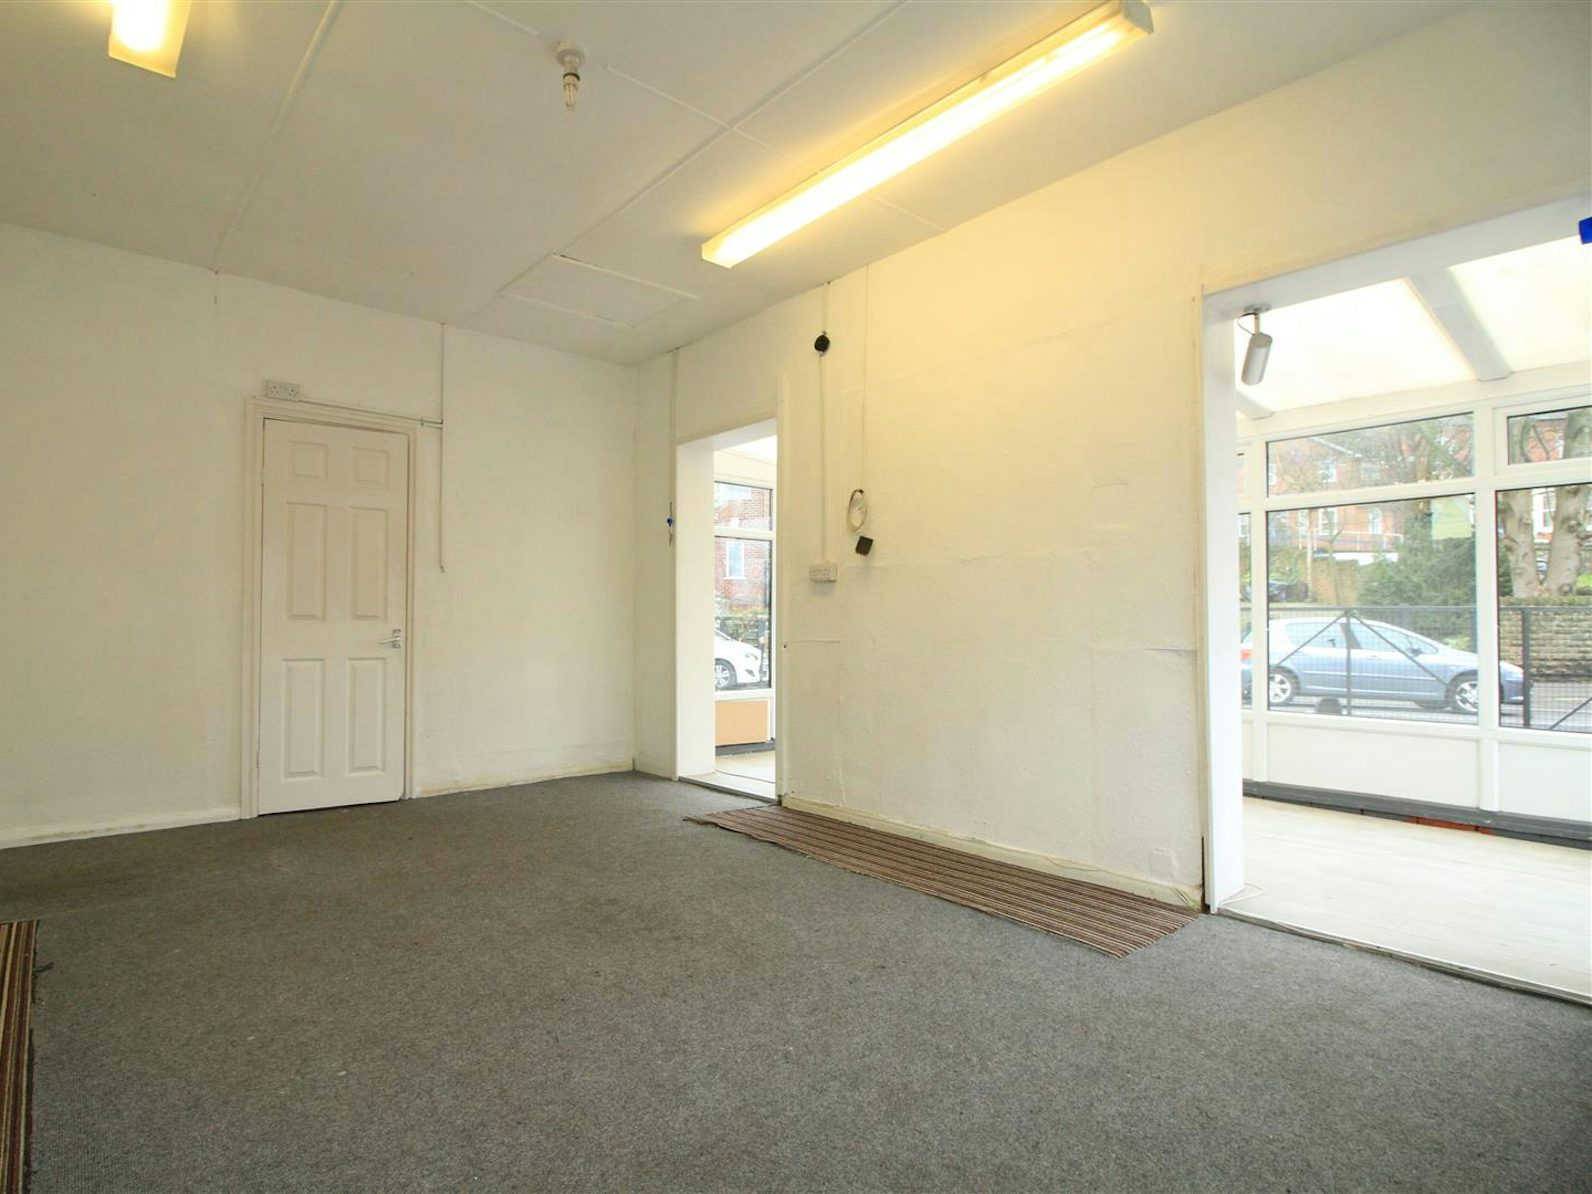 Commercial Property to rent on Highbury Road Bulwell, Nottingham, NG6